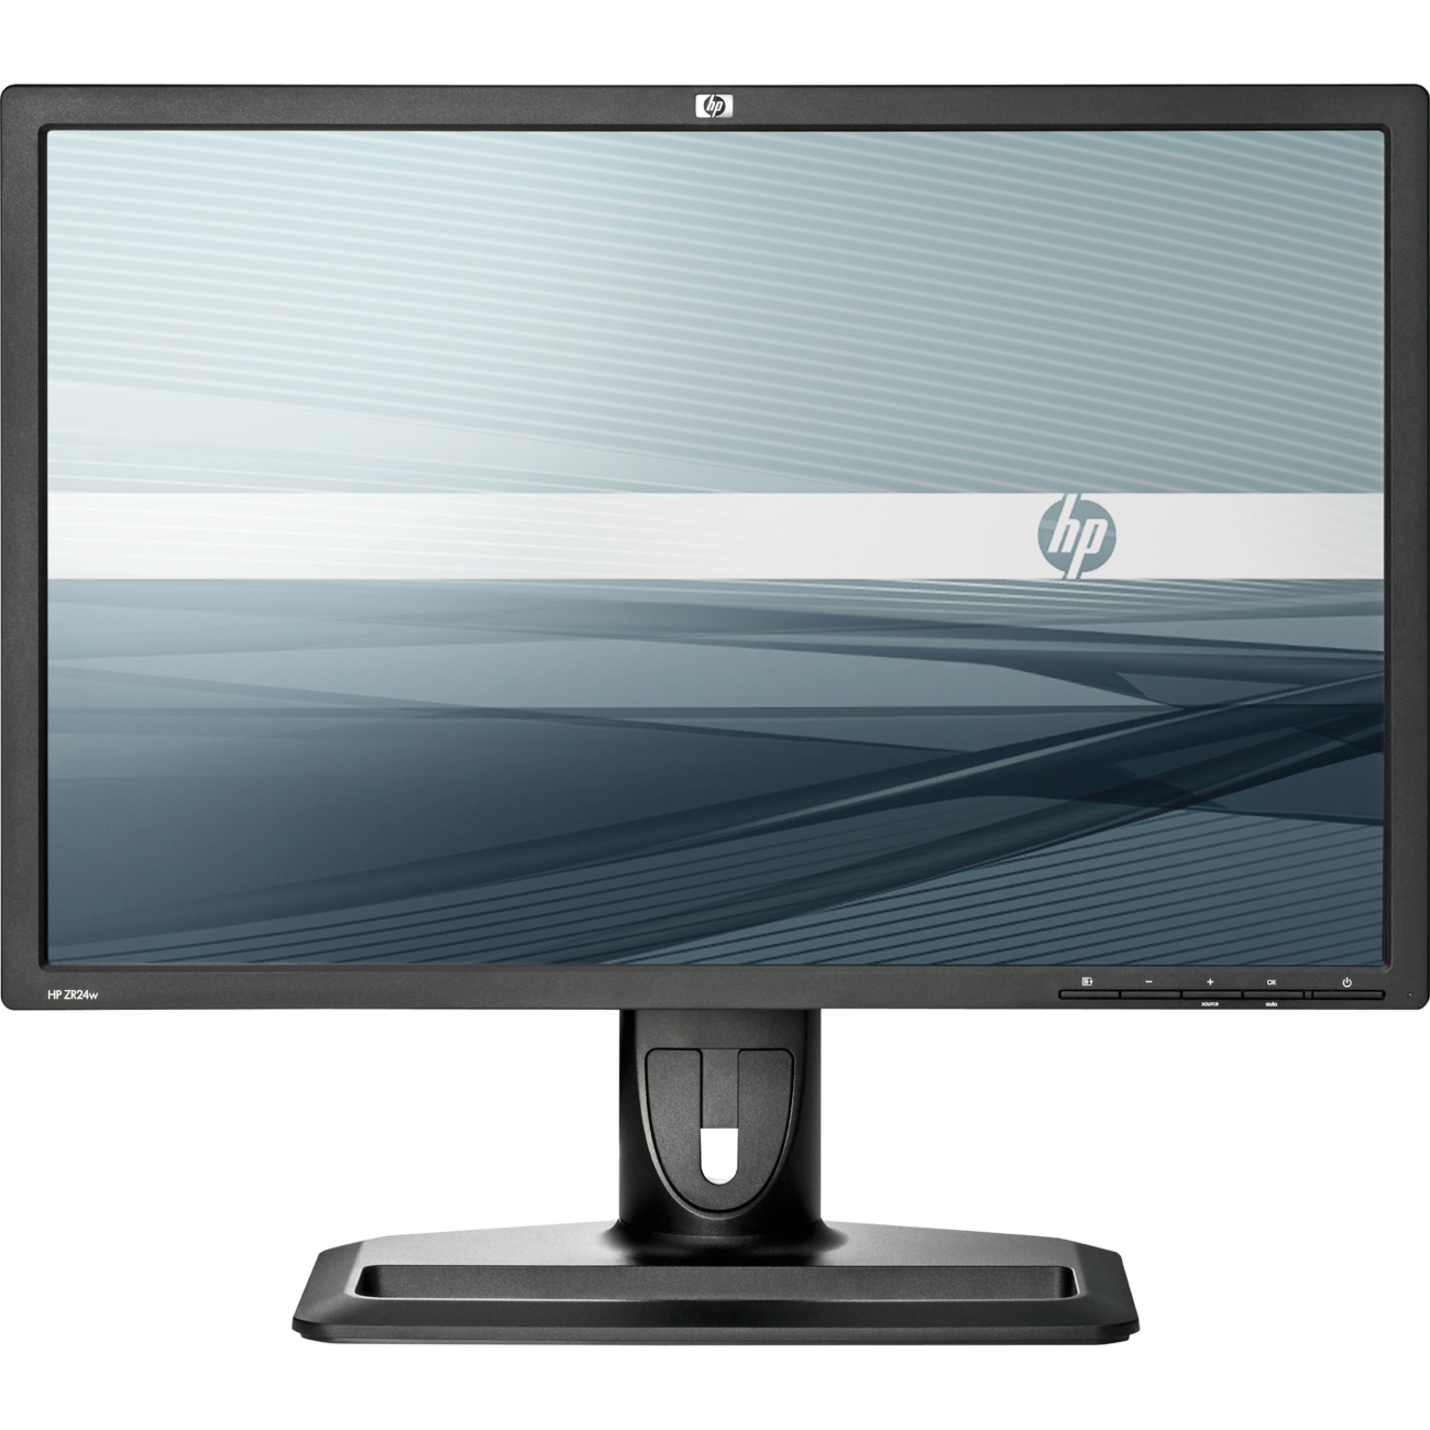 HP Performance ZR24w 24" LCD Monitor, 16:10, 5 ms- Smart Buy - image 1 of 5